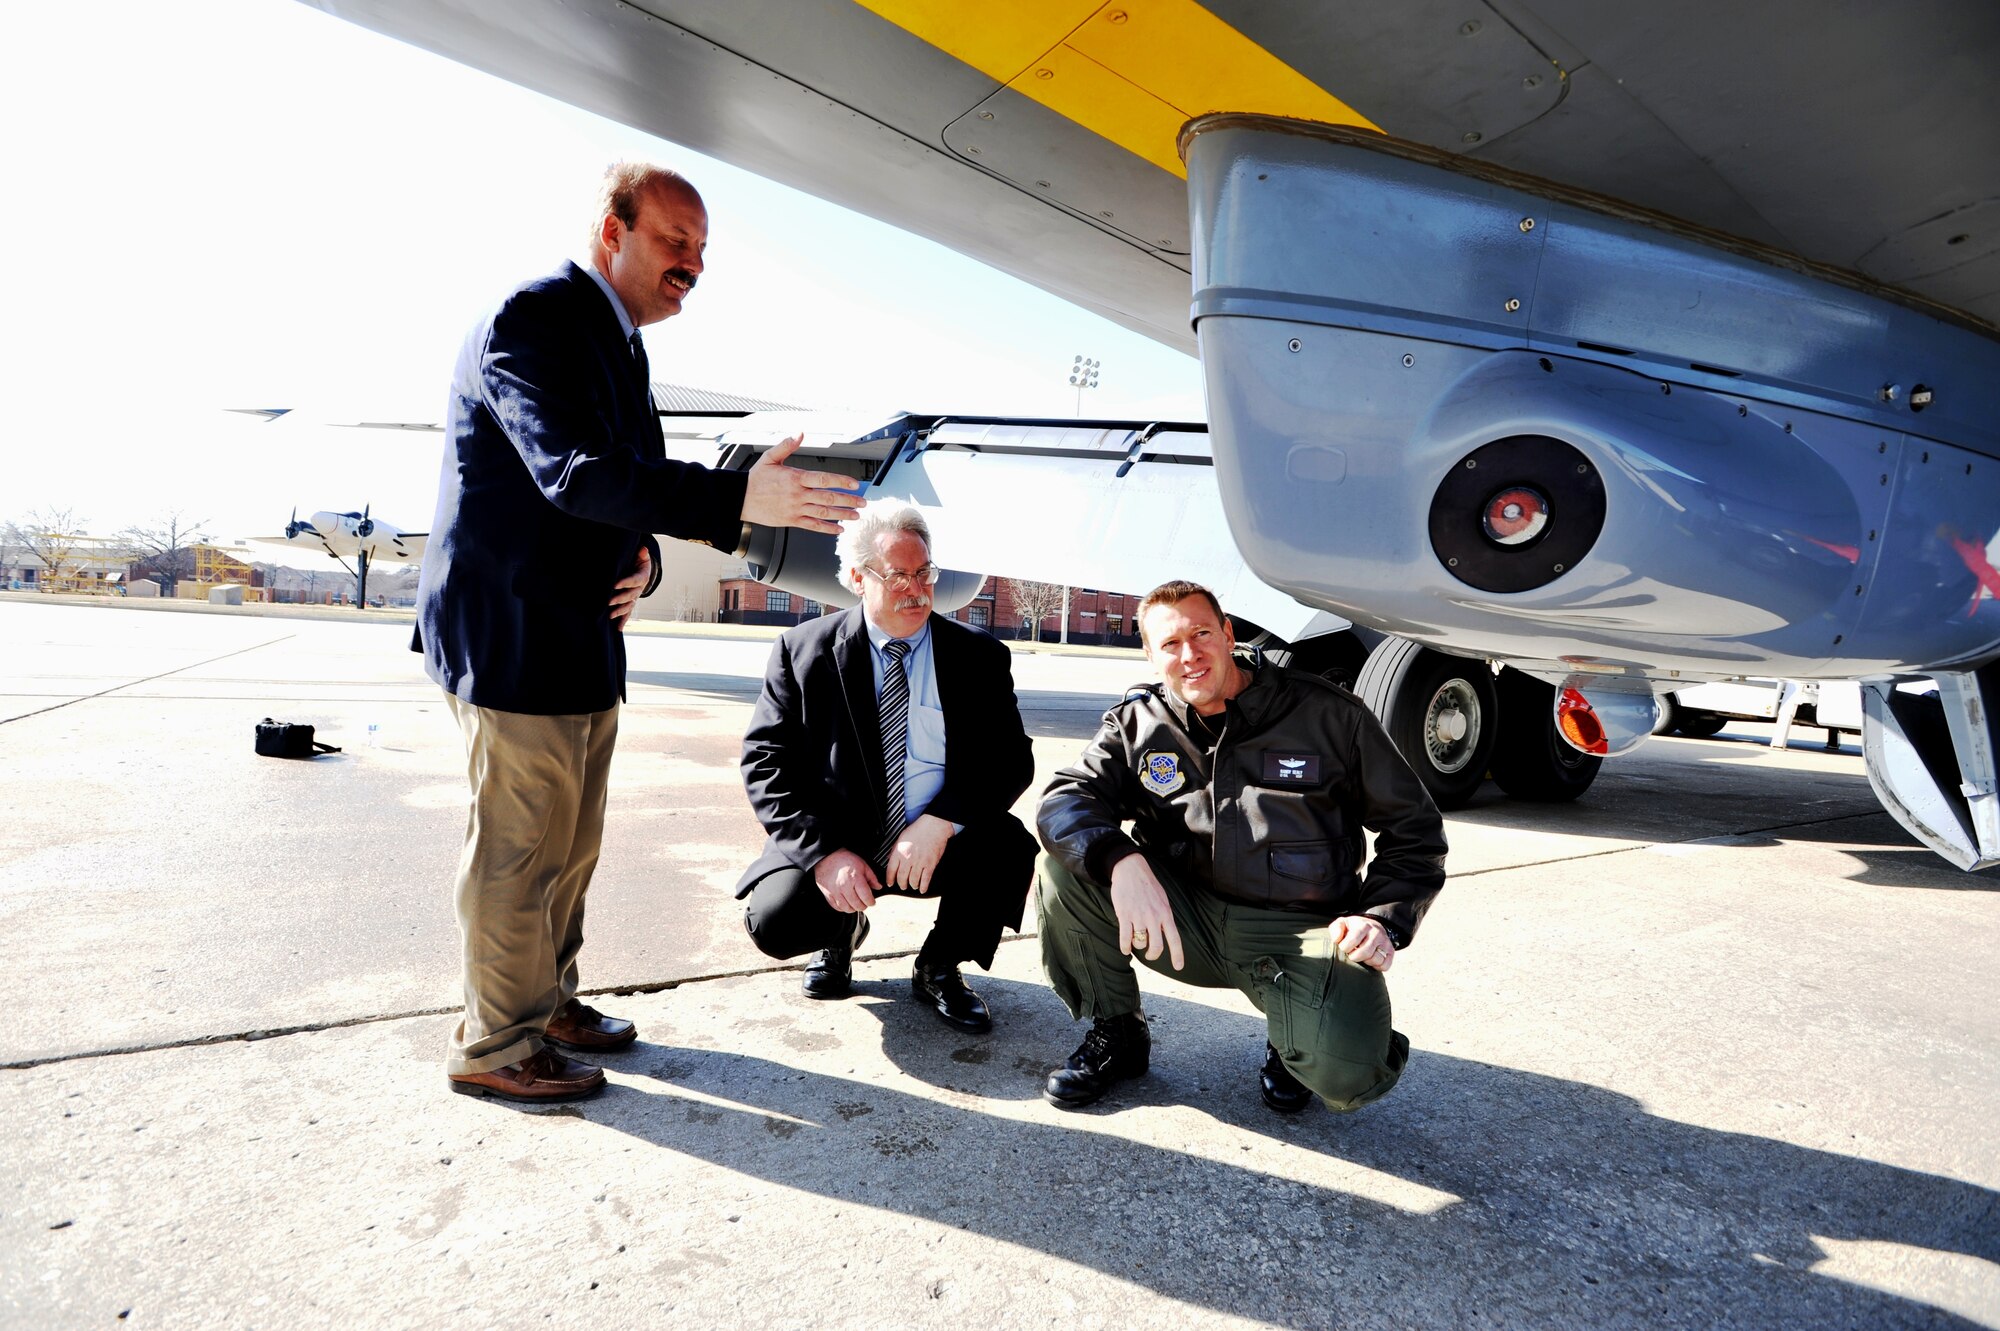 Mr. James Shilling, Large Aircraft Infrared Countermeasures, or LAIRCM, system manager for Northrop-Grumman in Chicago, Mr. Raymond Berhalter, program manager at the KC-135 System Program Office at Tinker AFB, Okla., and Lt. Col. Randall Sealy, tanker test manager and chief of Headquarters Air Mobility Command’s Aircraft Test Management Branch -- part of AMC’s Test and Evaluation Division, look at a LAIRCM pod attached to a KC-135 Stratotanker parked on the flightline March 1, 2011, at Scott Air Force Base, Ill.  In a combined effort between Air Mobility Command, the Air National Guard, the KC-135 Program Office, Northrop-Grumman and other agencies, a KC-135 LAIRCM pod defensive system is becoming a reality. The pod, called the Guardian System by maker Northrop-Grumman, is a laser-based countermeasures system designed to detect, provide warning of, and employ countermeasures against infrared-guided surface-to-air missiles. (U.S. Air Force Photo/Master Sgt. Scott T. Sturkol)